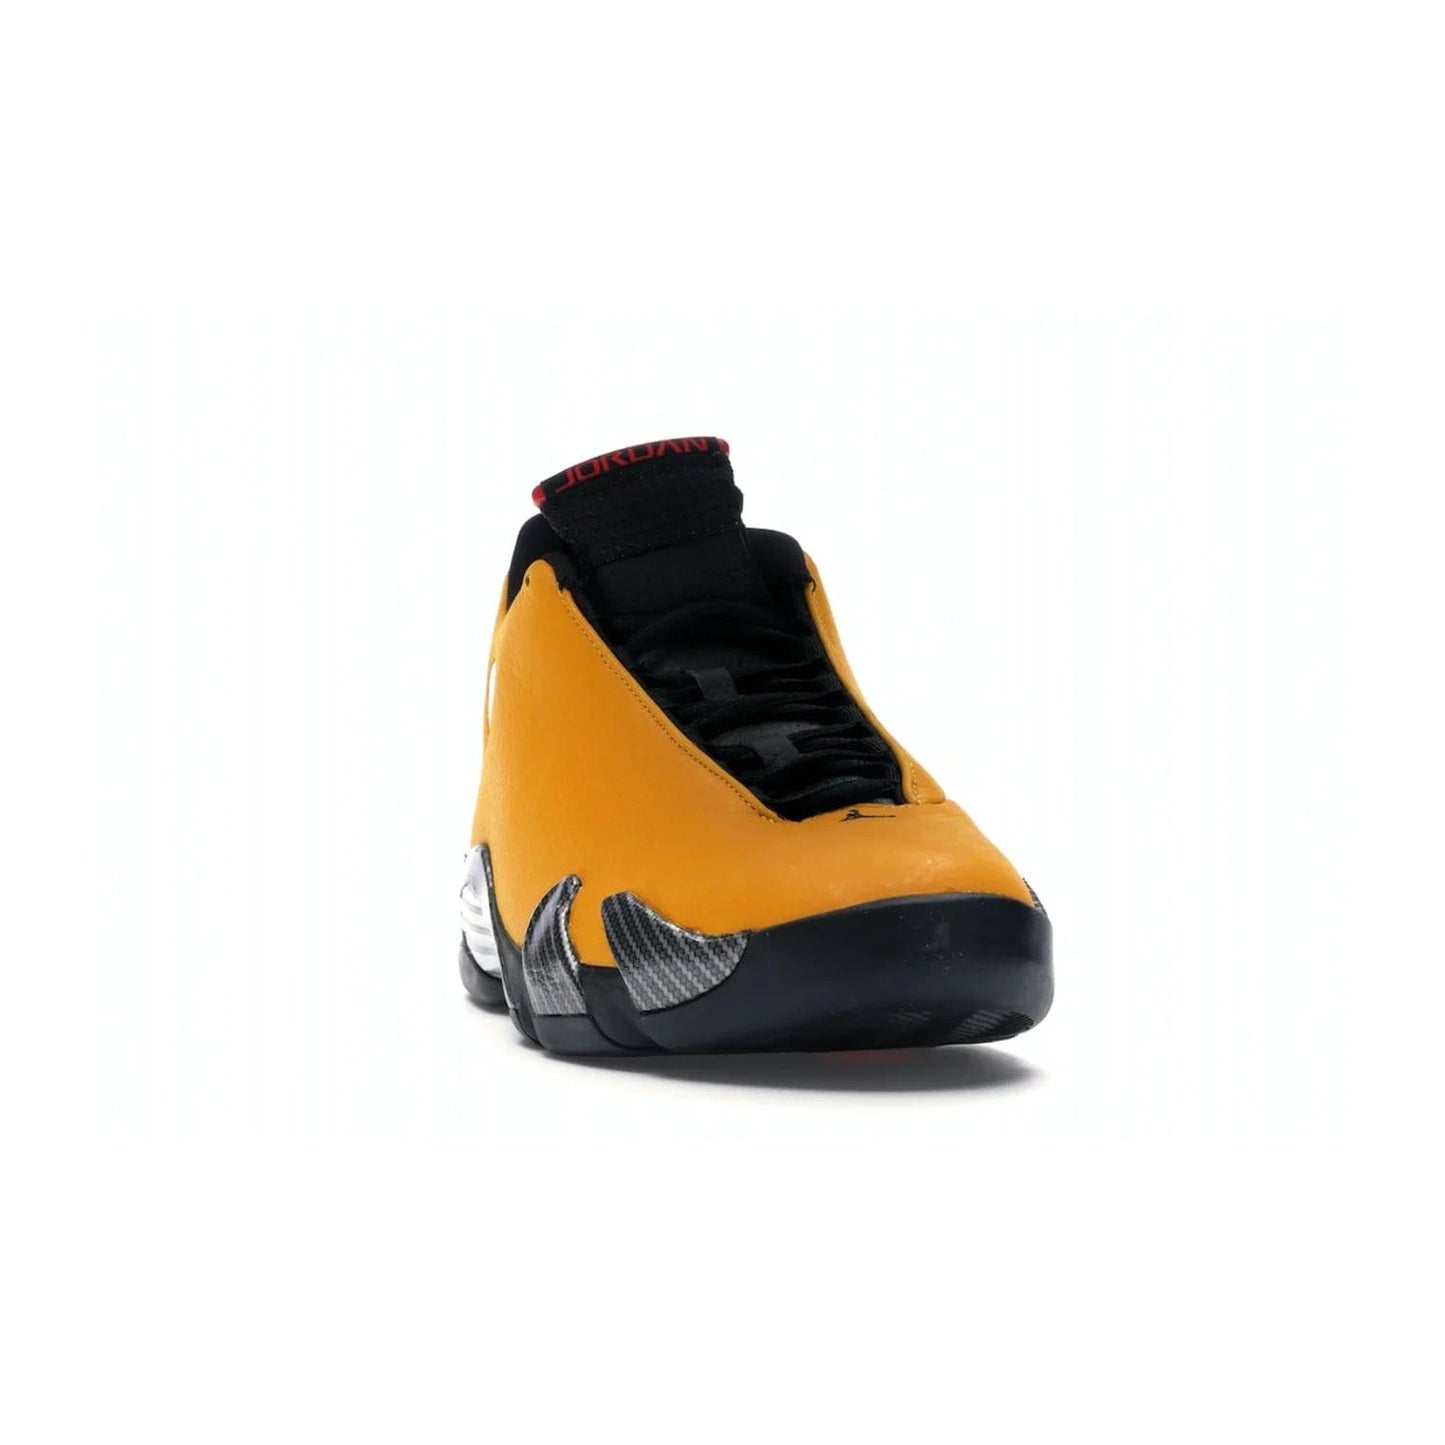 Jordan 14 Retro University Gold - Image 8 - Only at www.BallersClubKickz.com - Air Jordan 14 Retro University Gold: High-quality leather sneaker with Jumpman, tongue & heel logos. Zoom Air units & herringbone traction for superior comfort. University Gold outsole for stylish streetwear.